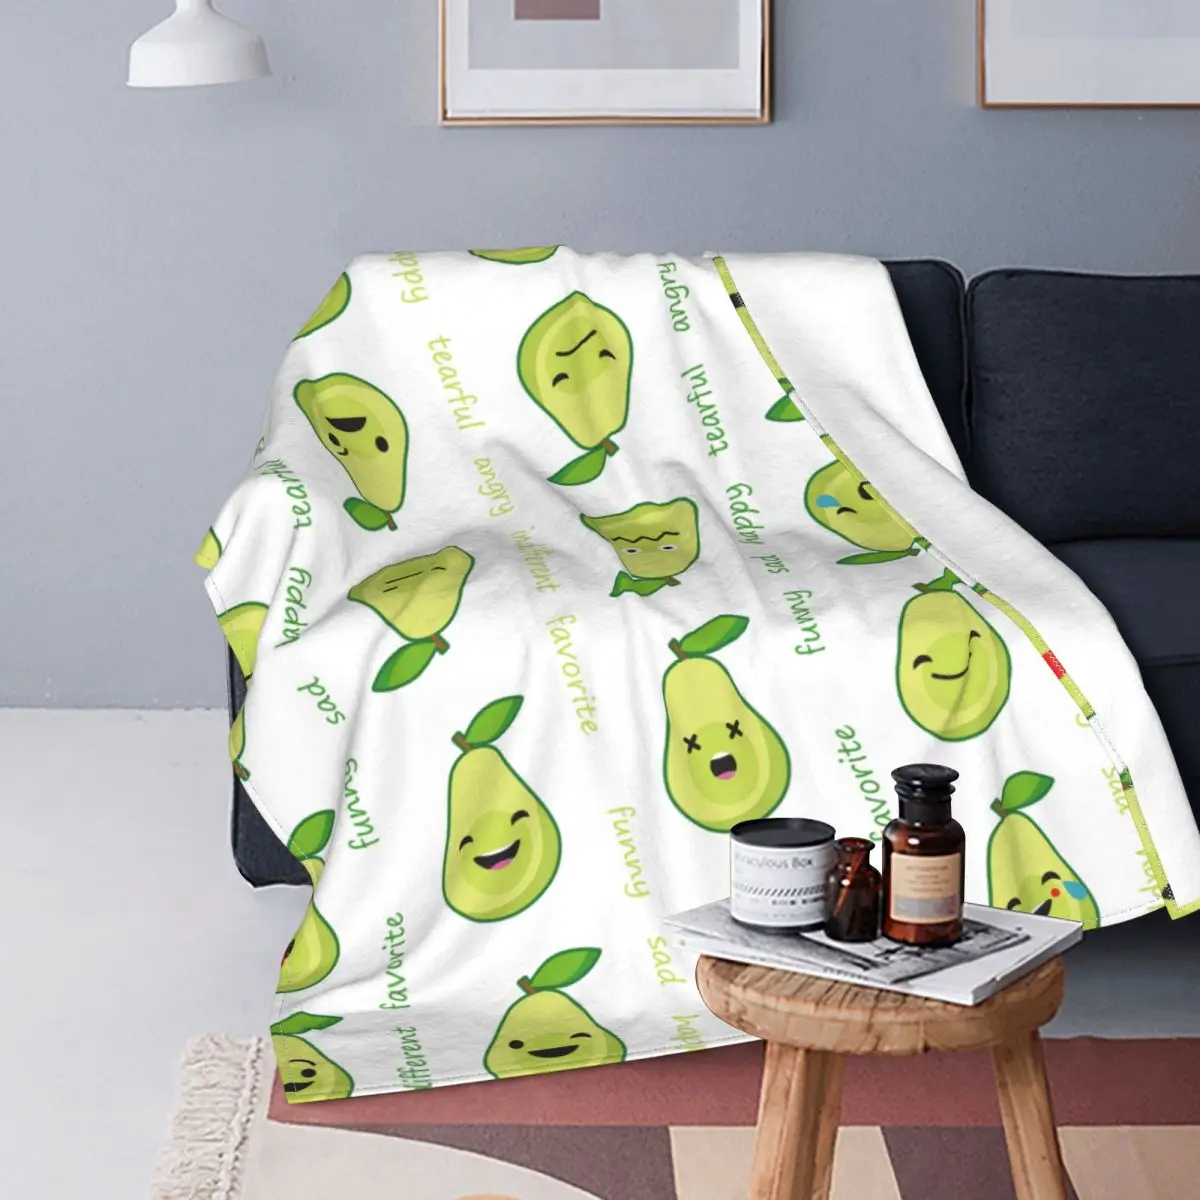 

Cute Avocado Emotions Cartoon Blanket Flannel Spring Autumn Avocados Lover Soft Throw Blankets for Bed Couch Plush Thin Quilt